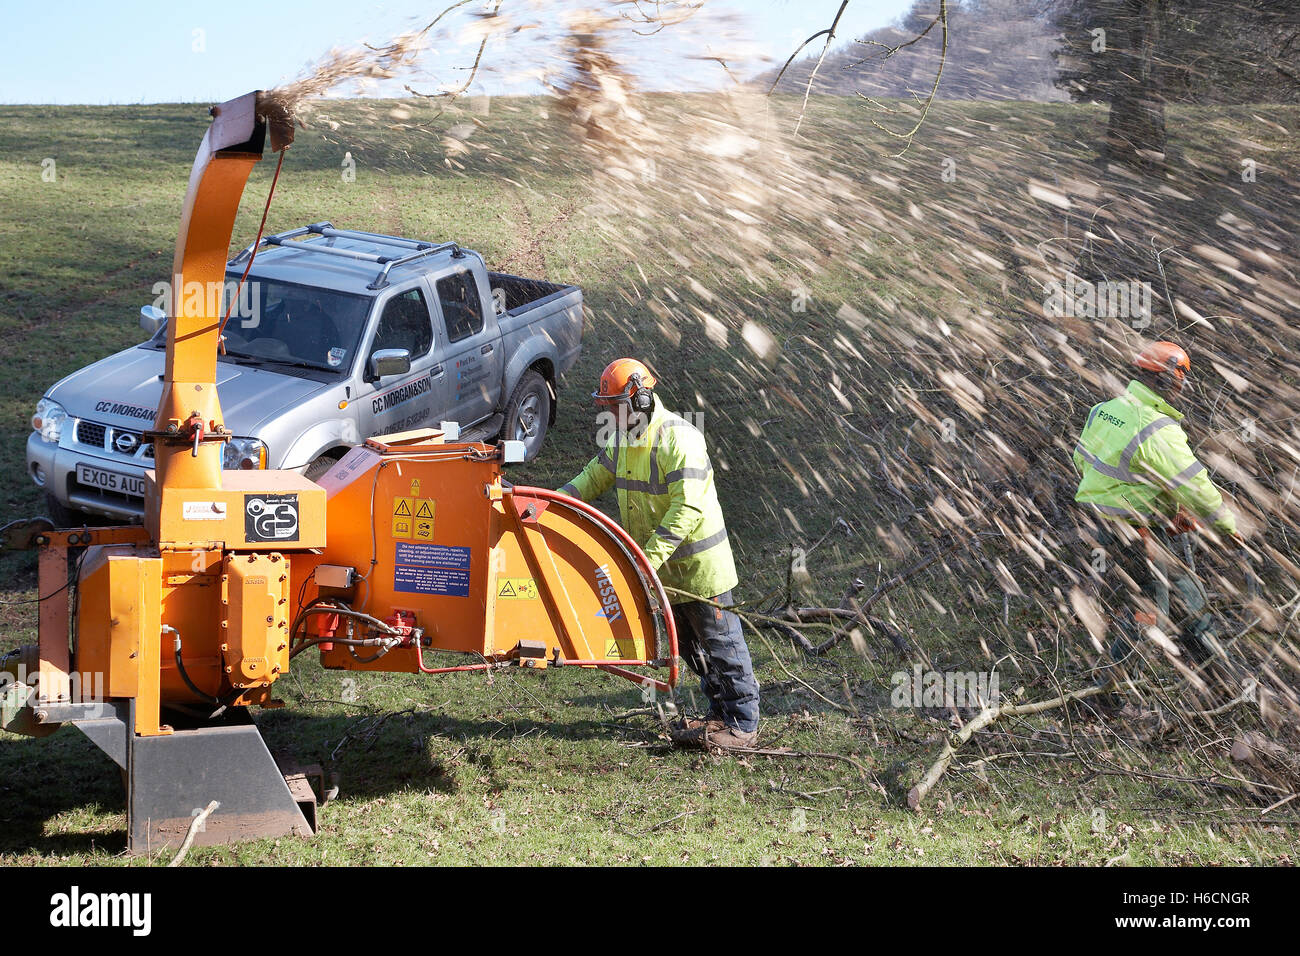 Workmen Shredding trees with a wood chipping machine which have fallen during a storm in the countryside in South Wales, UK. Stock Photo